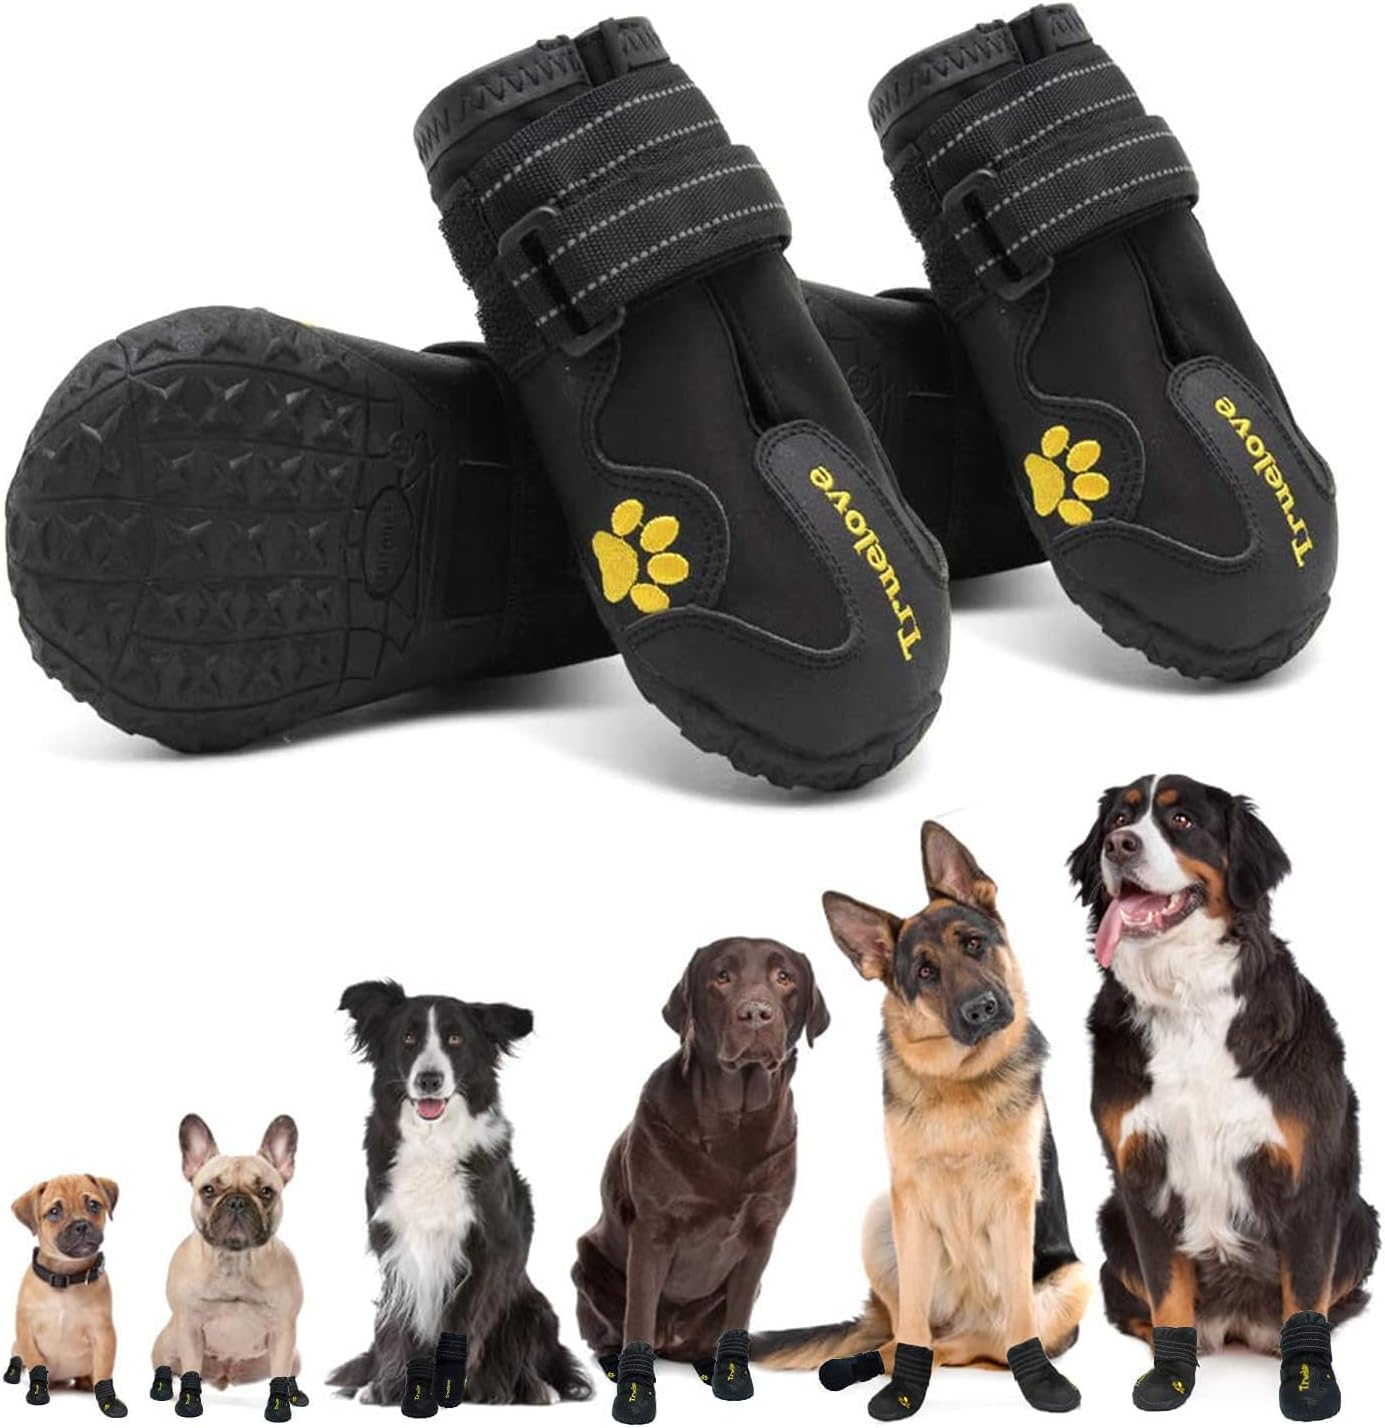 Expawlorer Anti-Slip Dog Shoes - Dog Booties for Winter with Rugged Sole and Reflective Strap